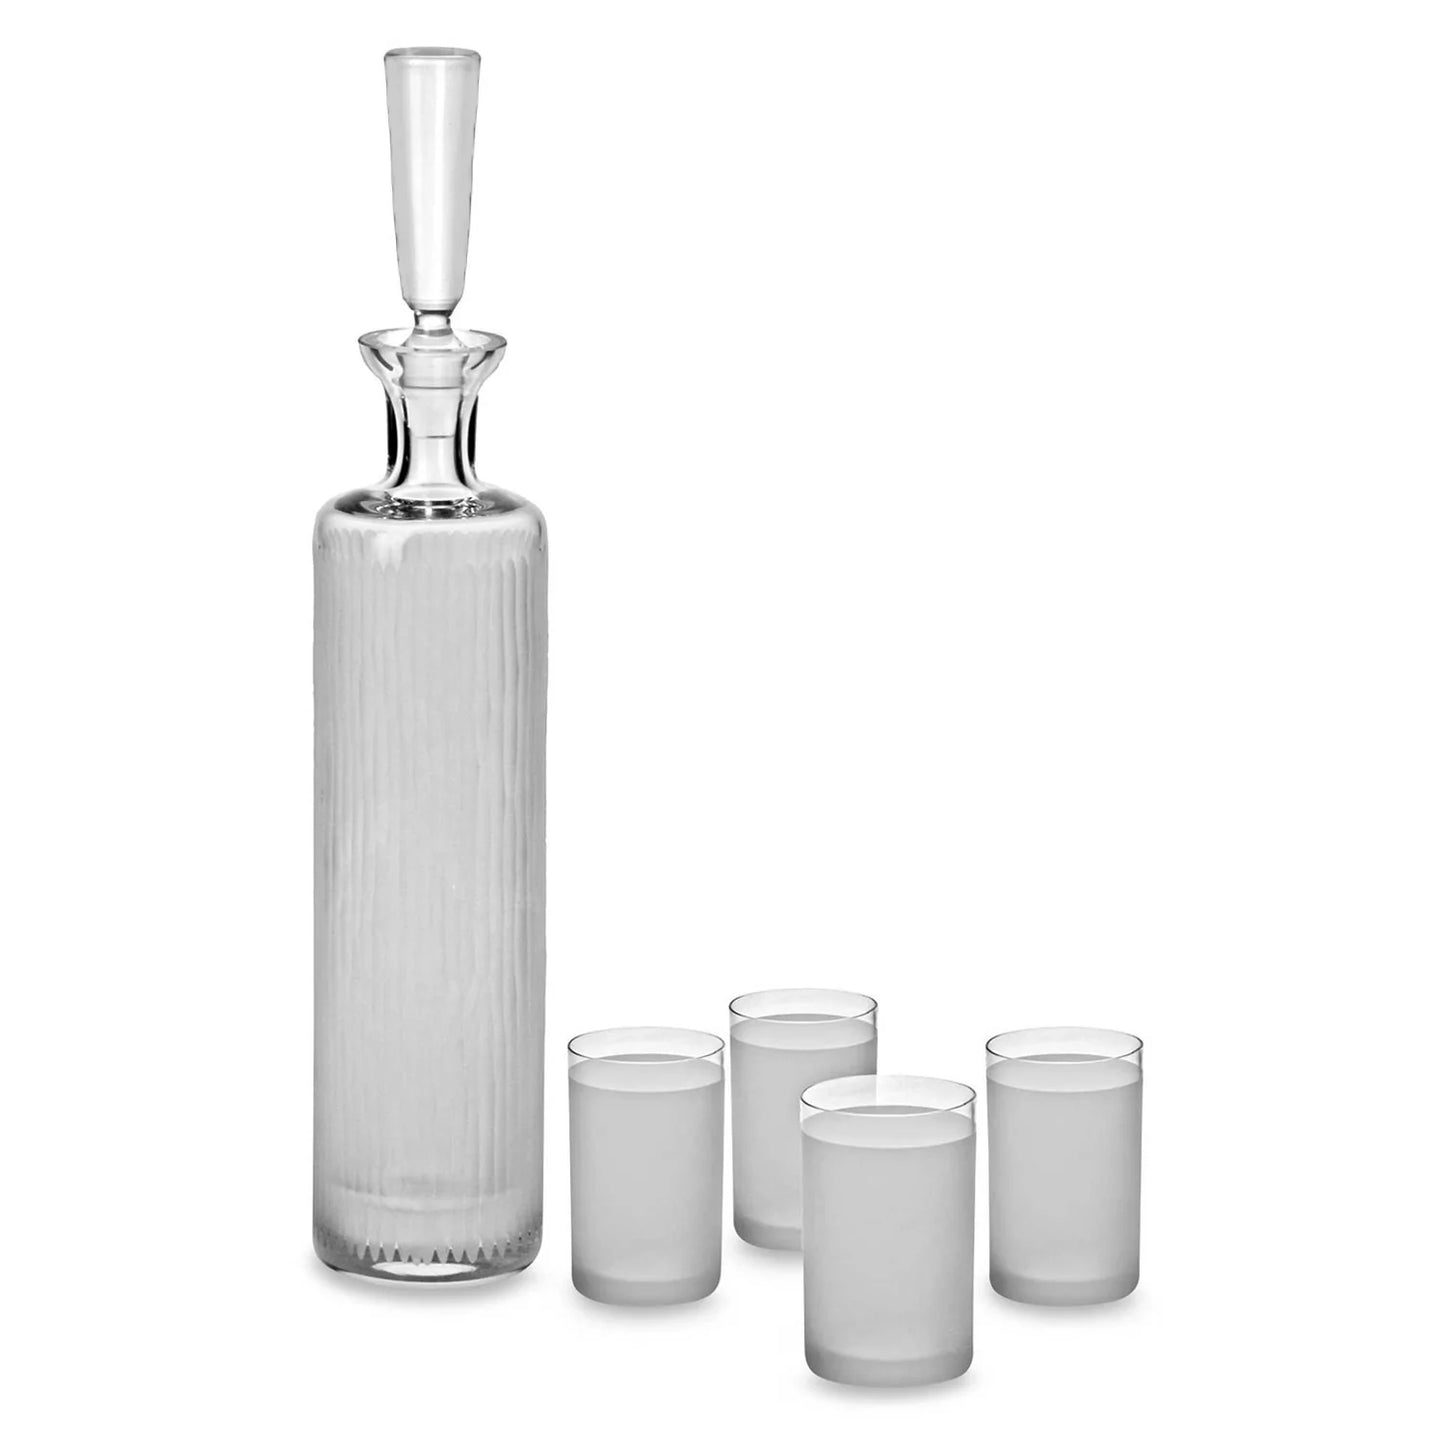 Ravenscroft Crystal Vodka Decanter Gift Set with Free Luxury Satin Decanter and Stopper Bags and Microfiber Cleaning Cloth W7383